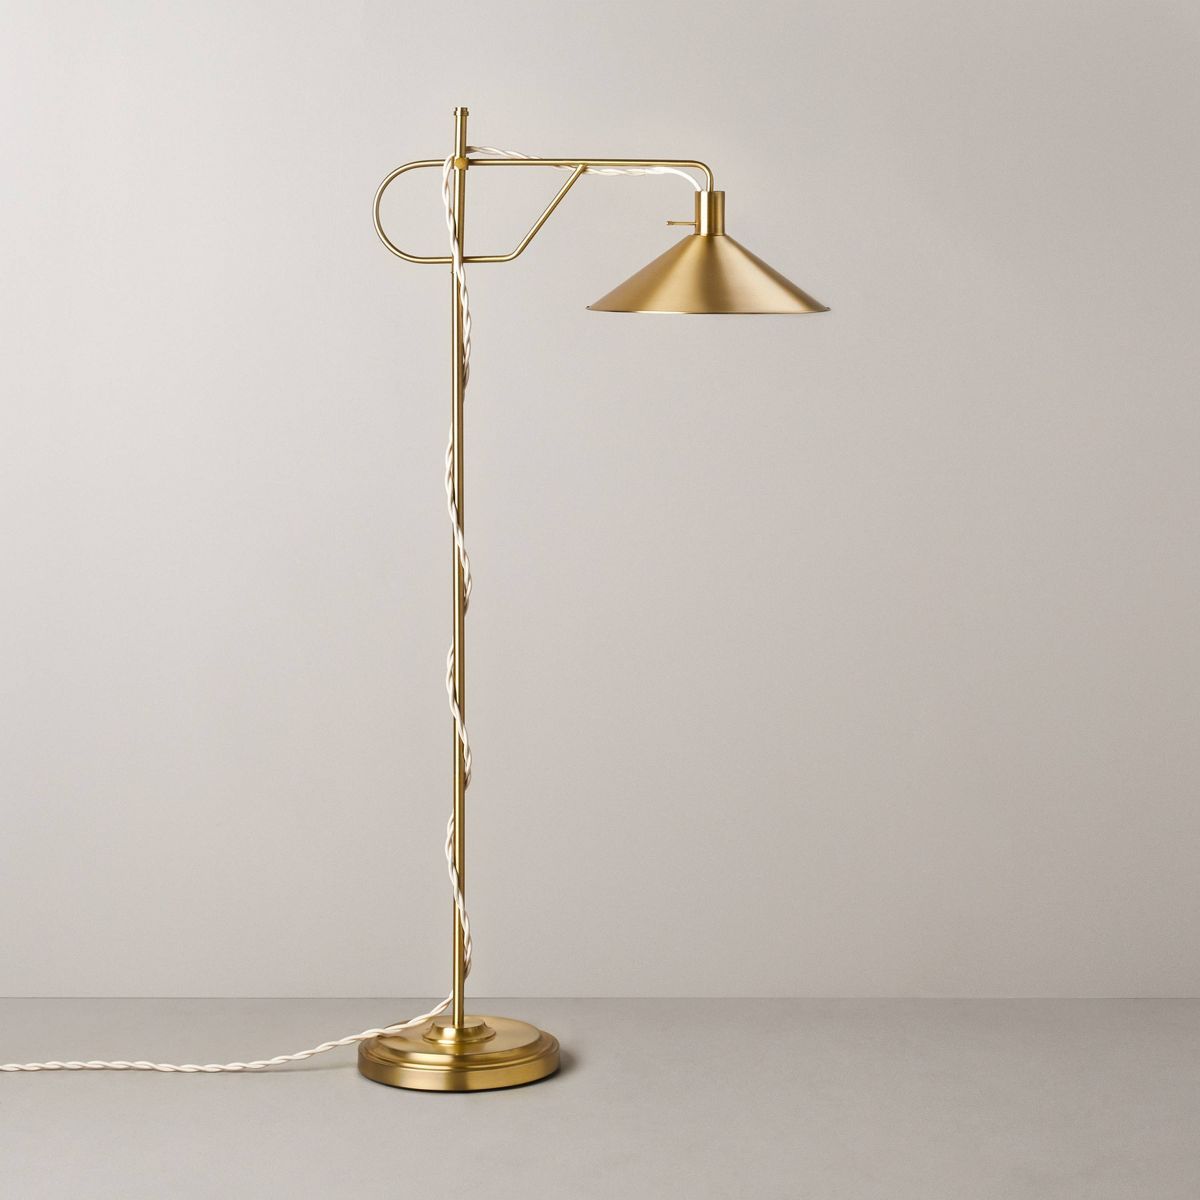 Extendable Brass Floor Lamp with Empire Shade - Hearth & Hand™ with Magnolia | Target